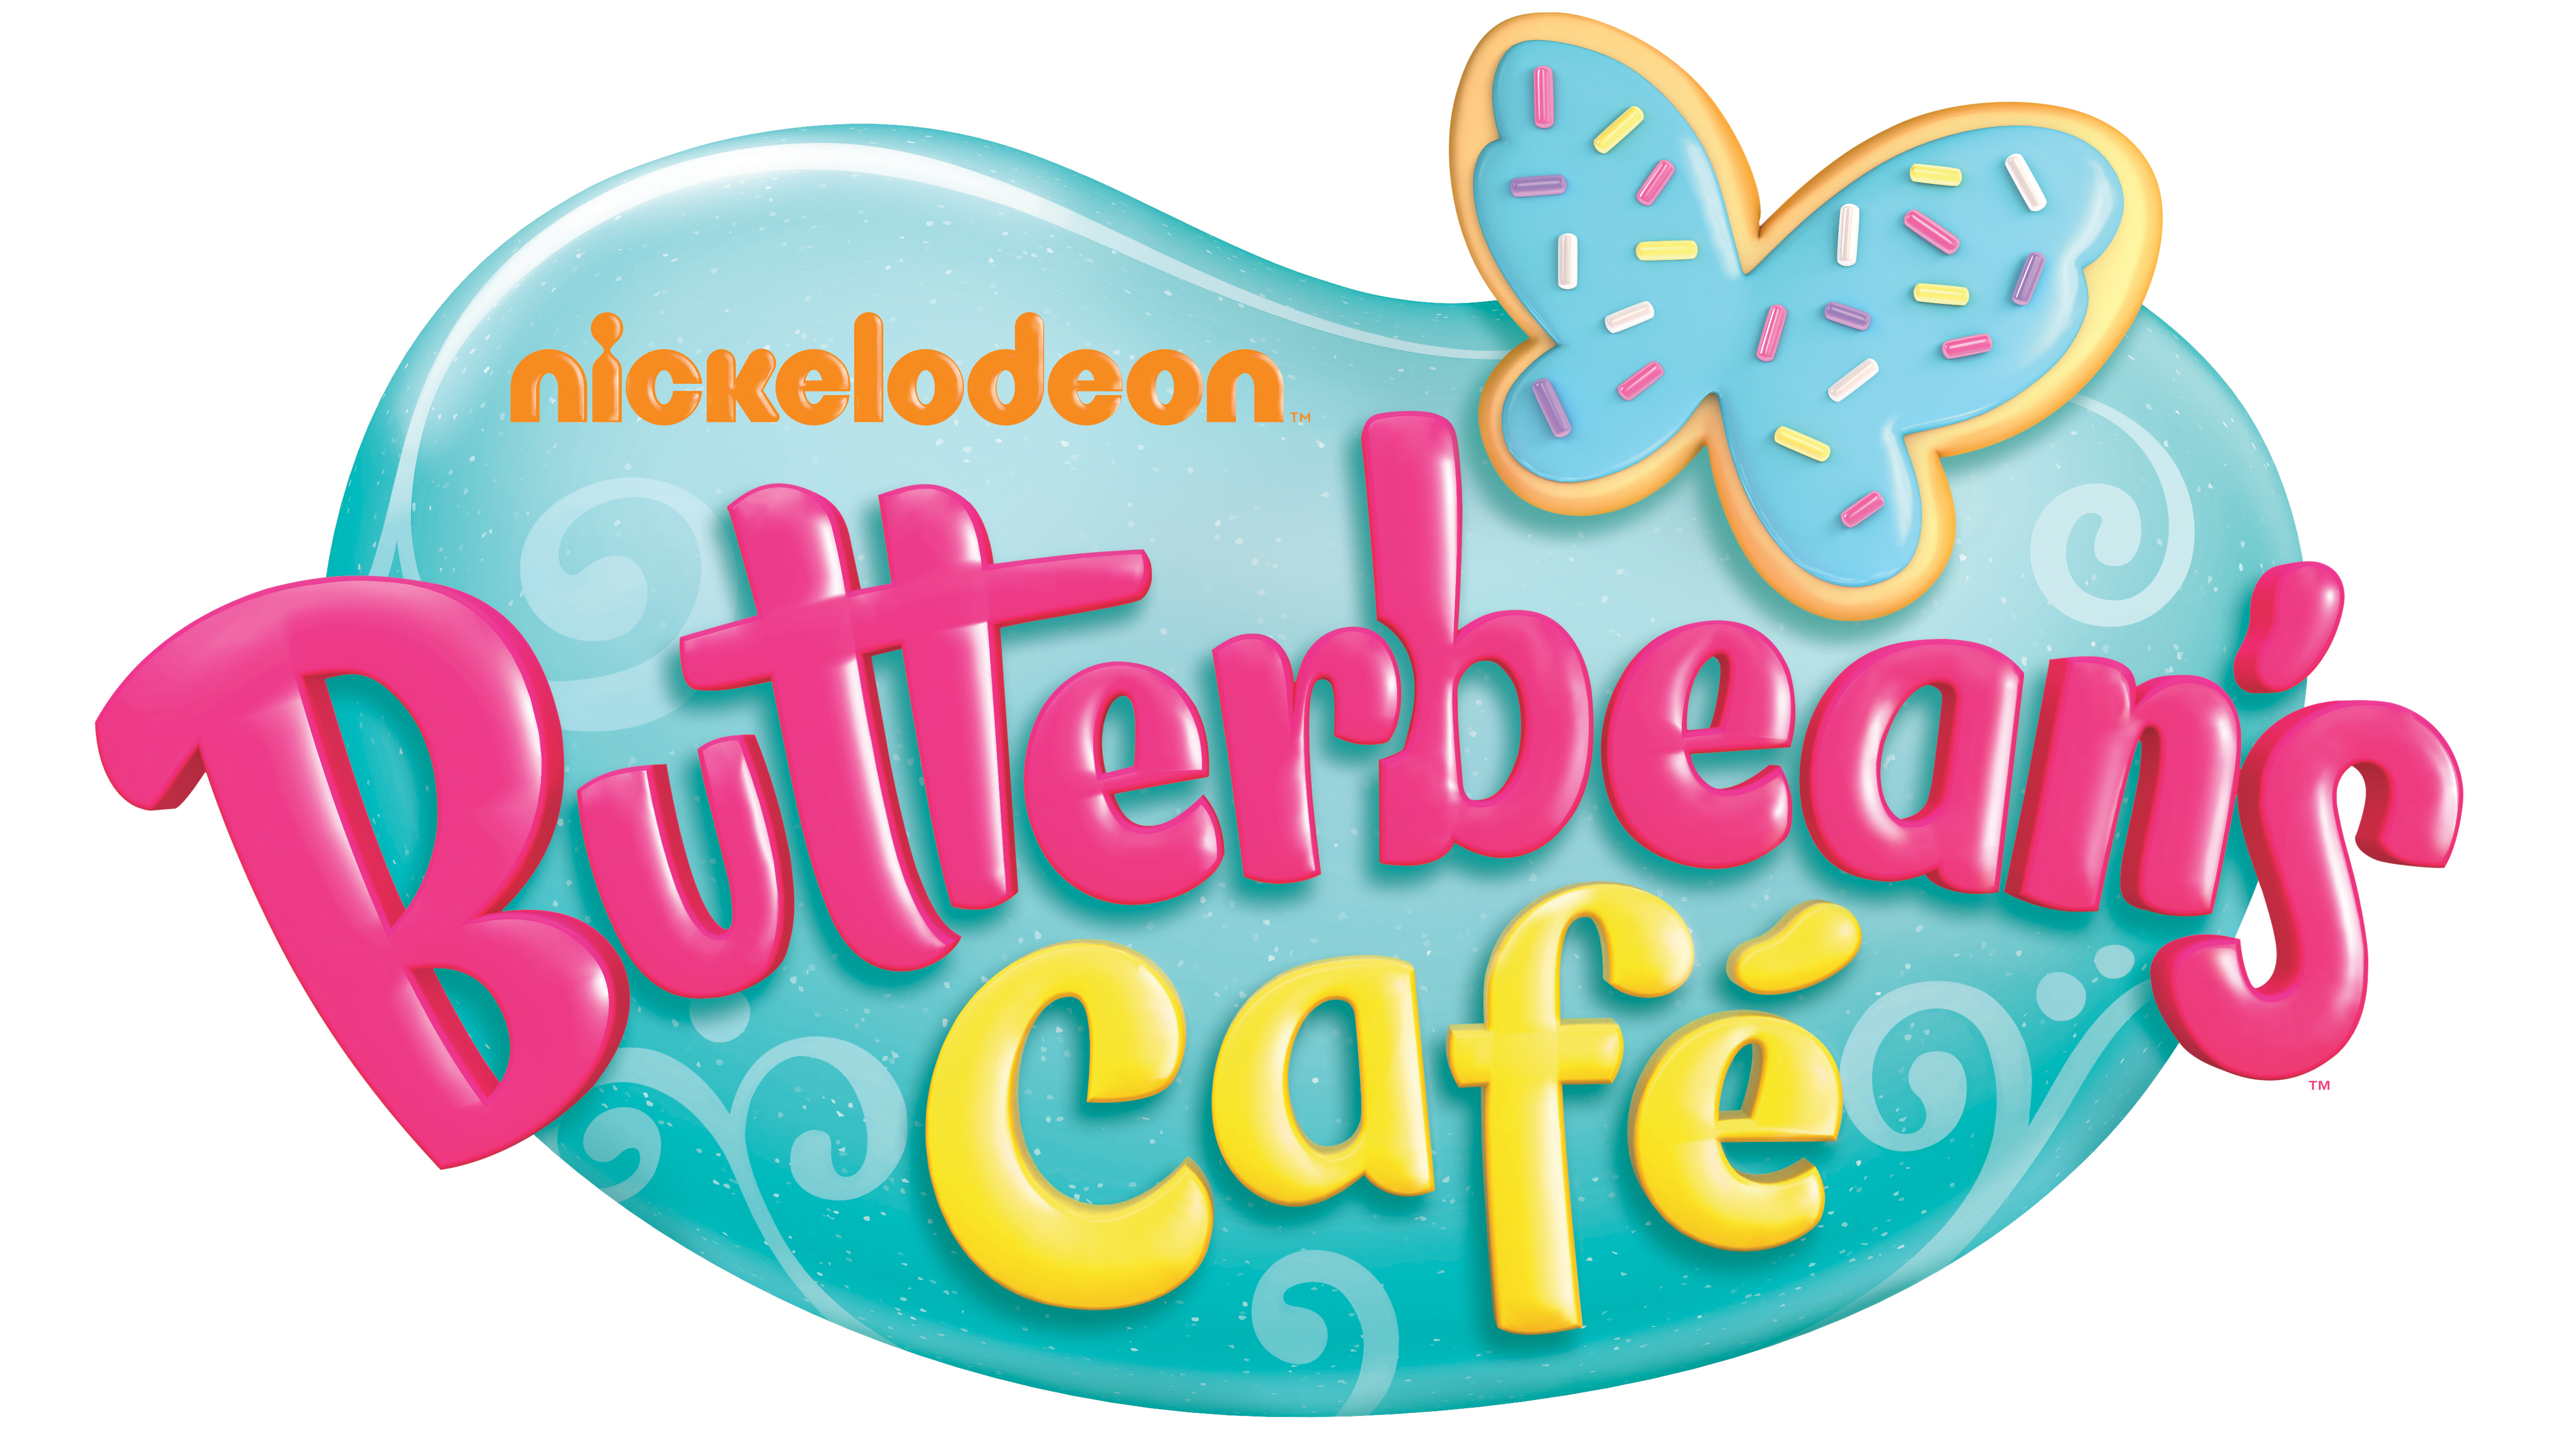 Nickelodeon Serves Up Brand-New Animated Preschool Series, Butterbean’s Caf...